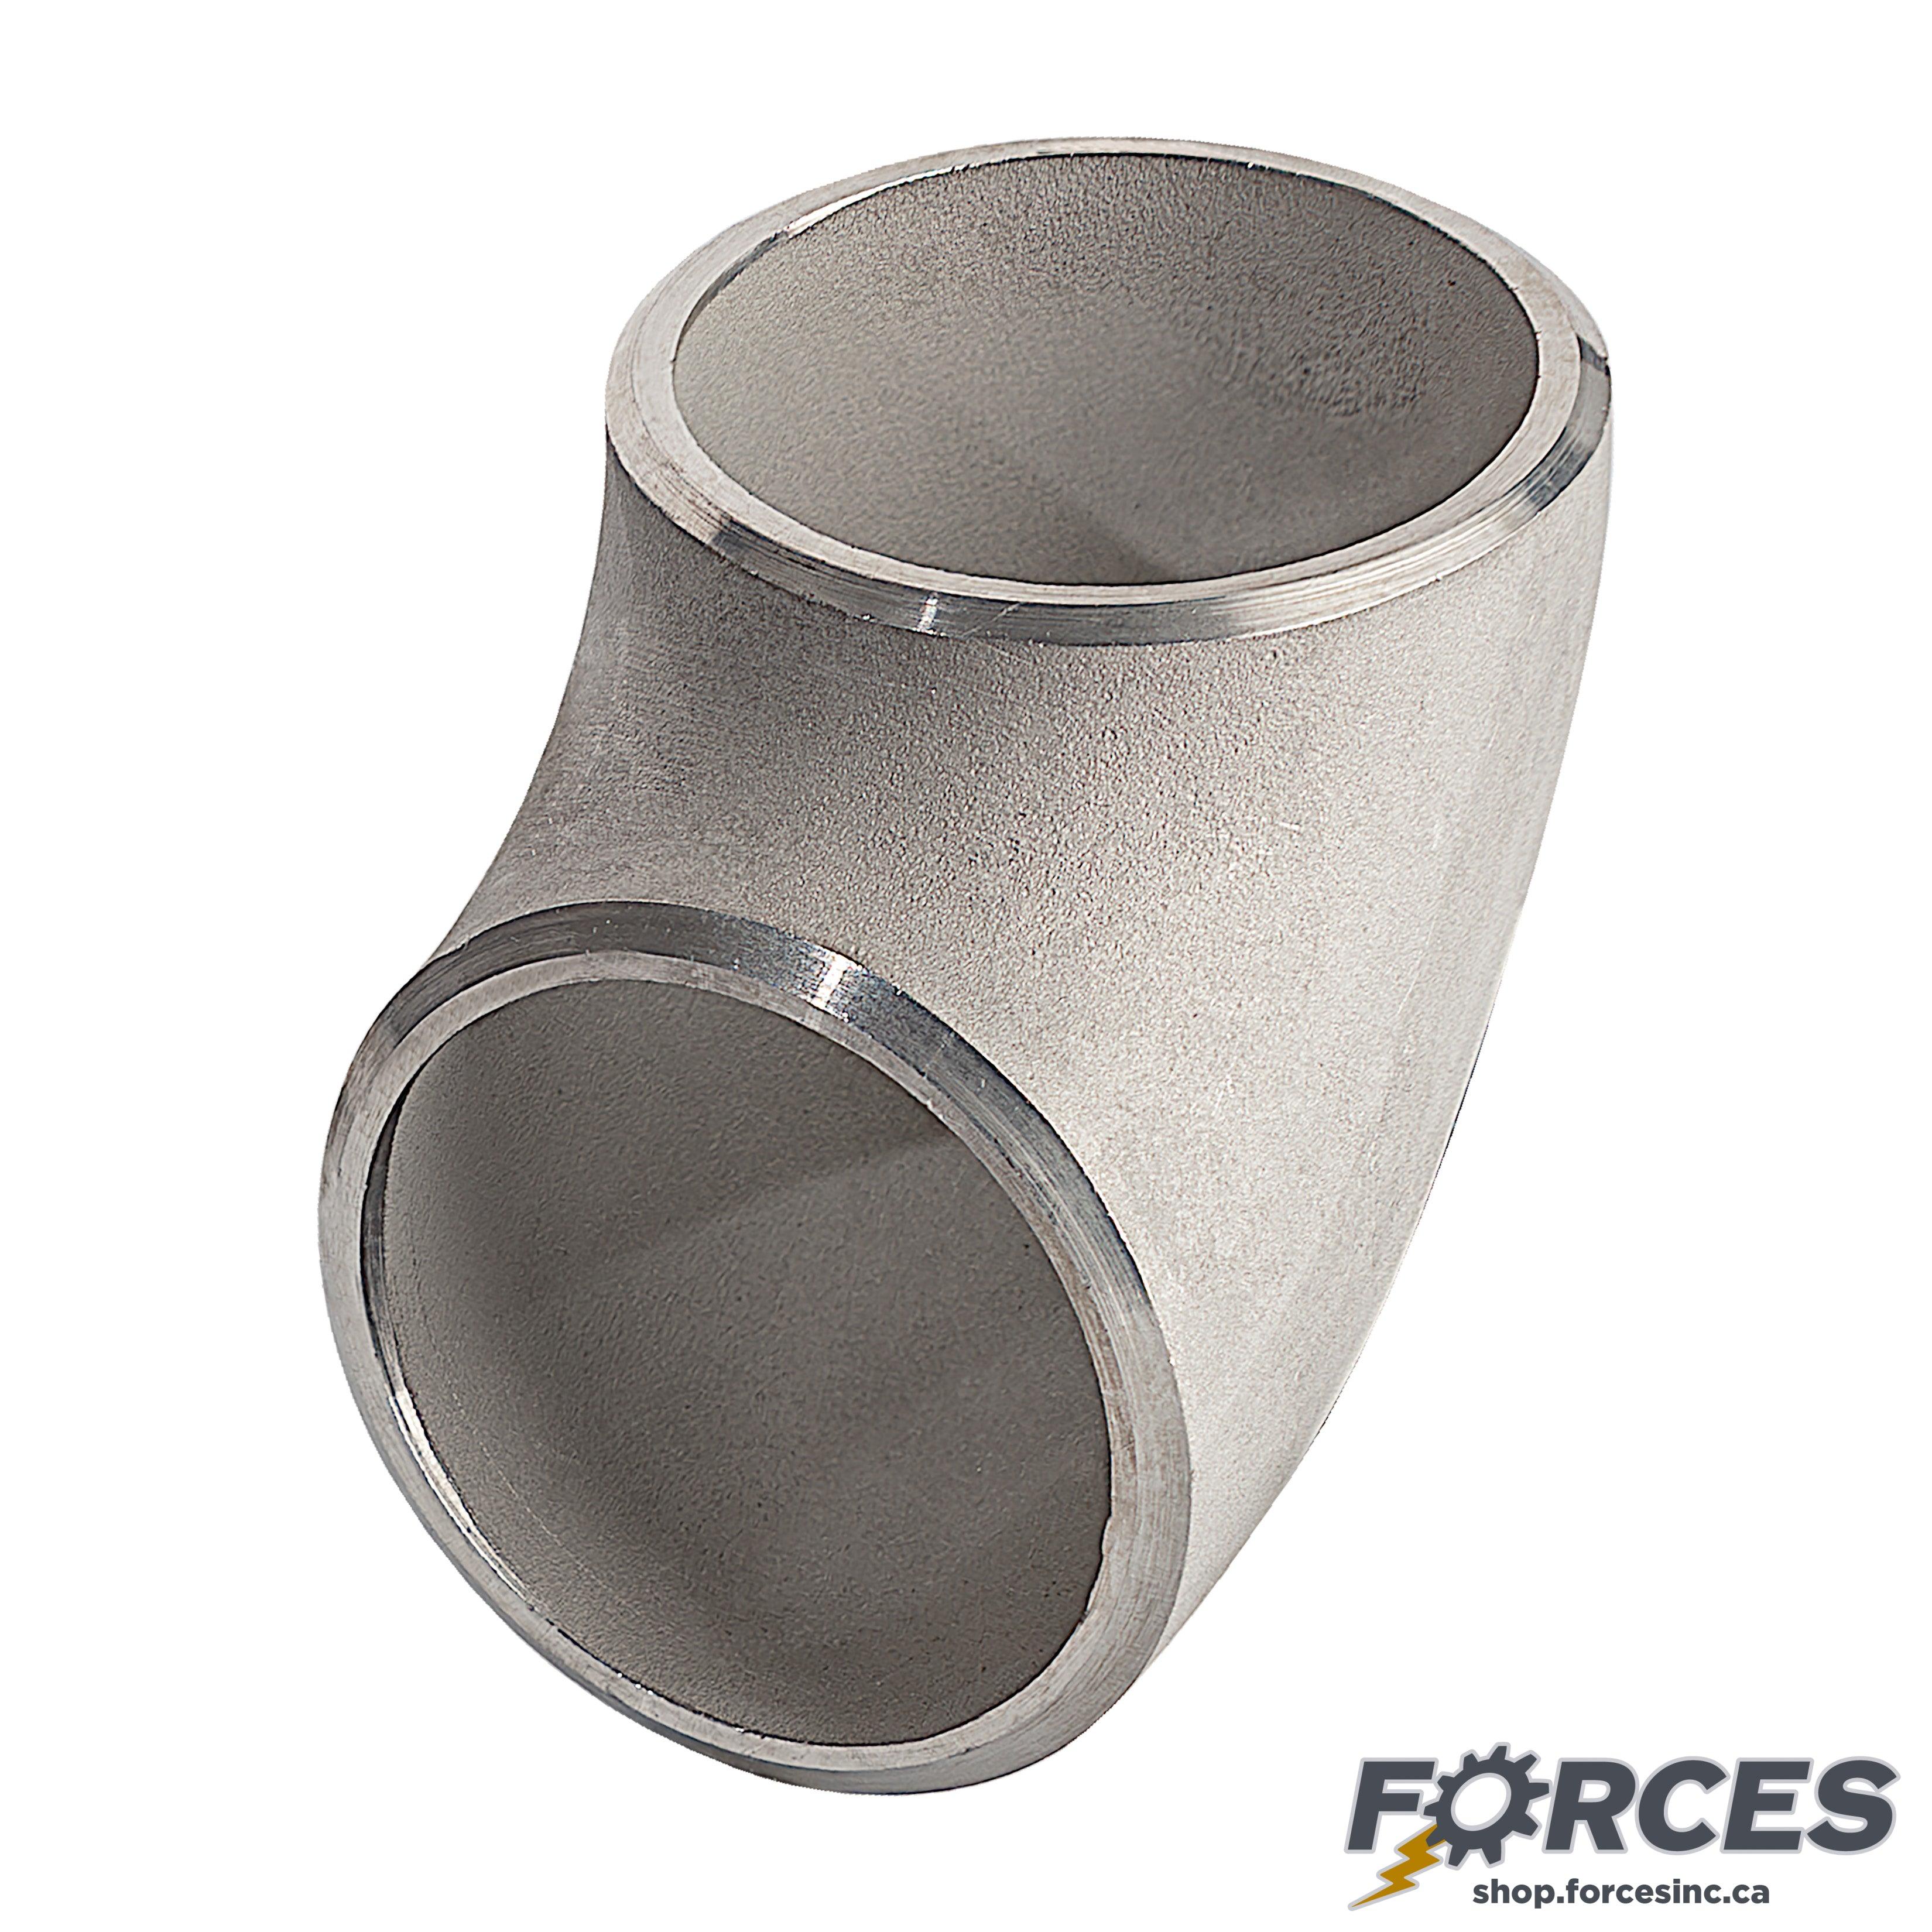 1-1/4" Elbow 45° SCH 40 Butt Weld - Stainless Steel 316 - Forces Inc